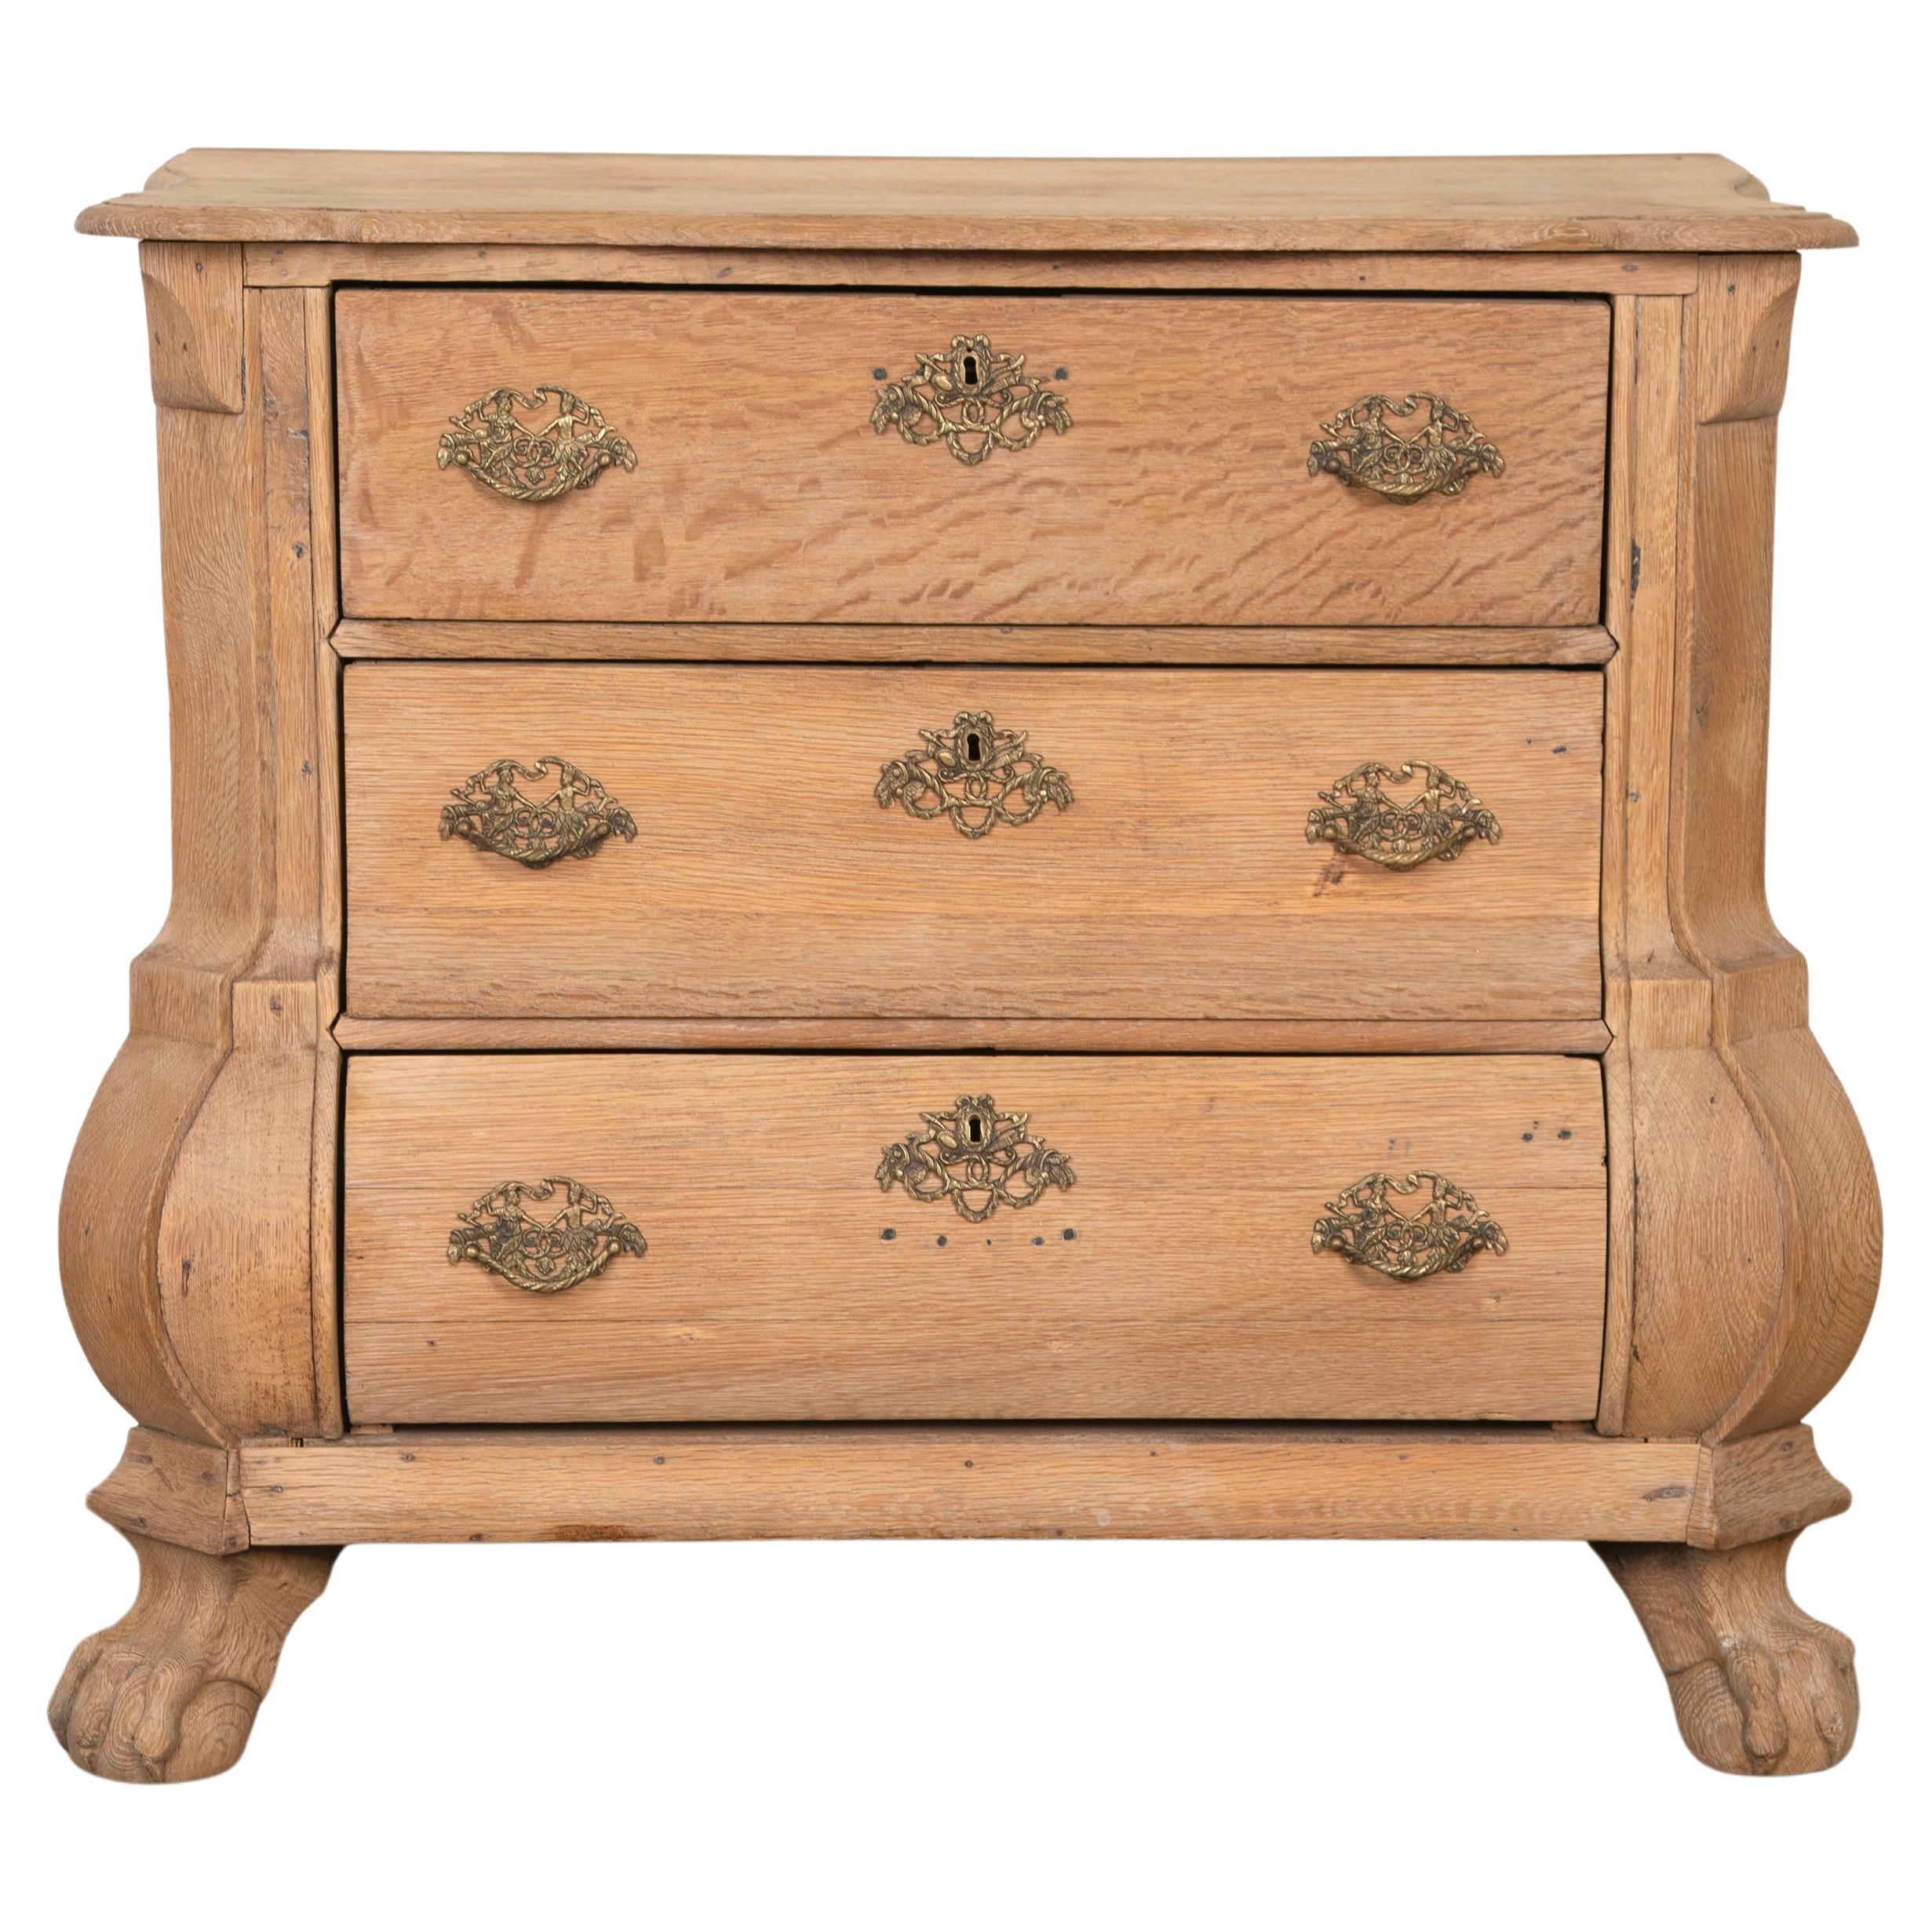 19th Century Small Dutch Oak Chest of Drawers